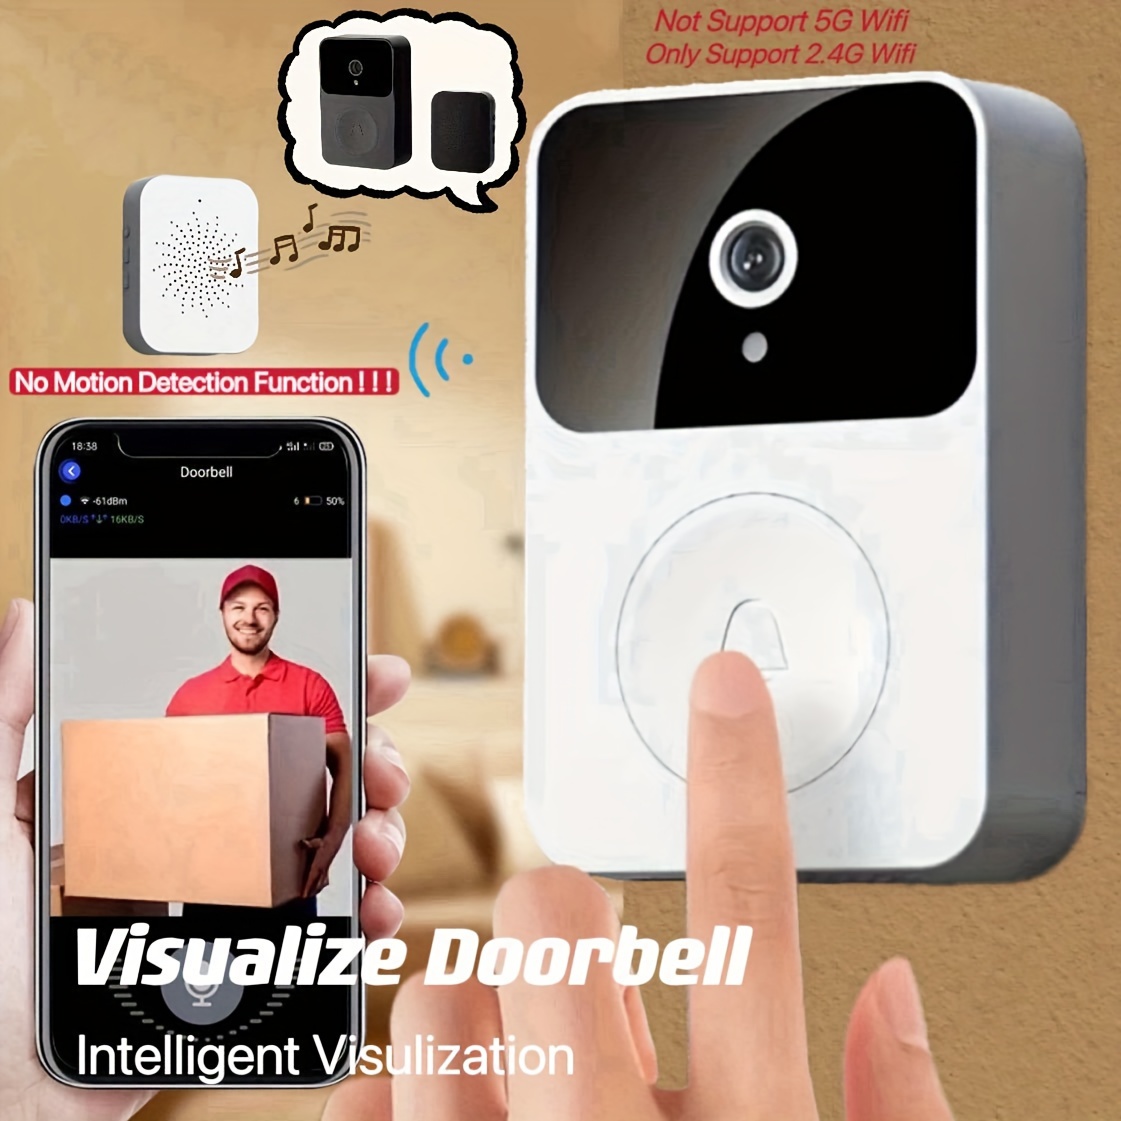 Wireless Video Doorbell Camera, Wifi Video Ring Bell Smart Doorbell with  Chime, Night Vision Home Security Camera Door Bell Kits with HD Video, Free